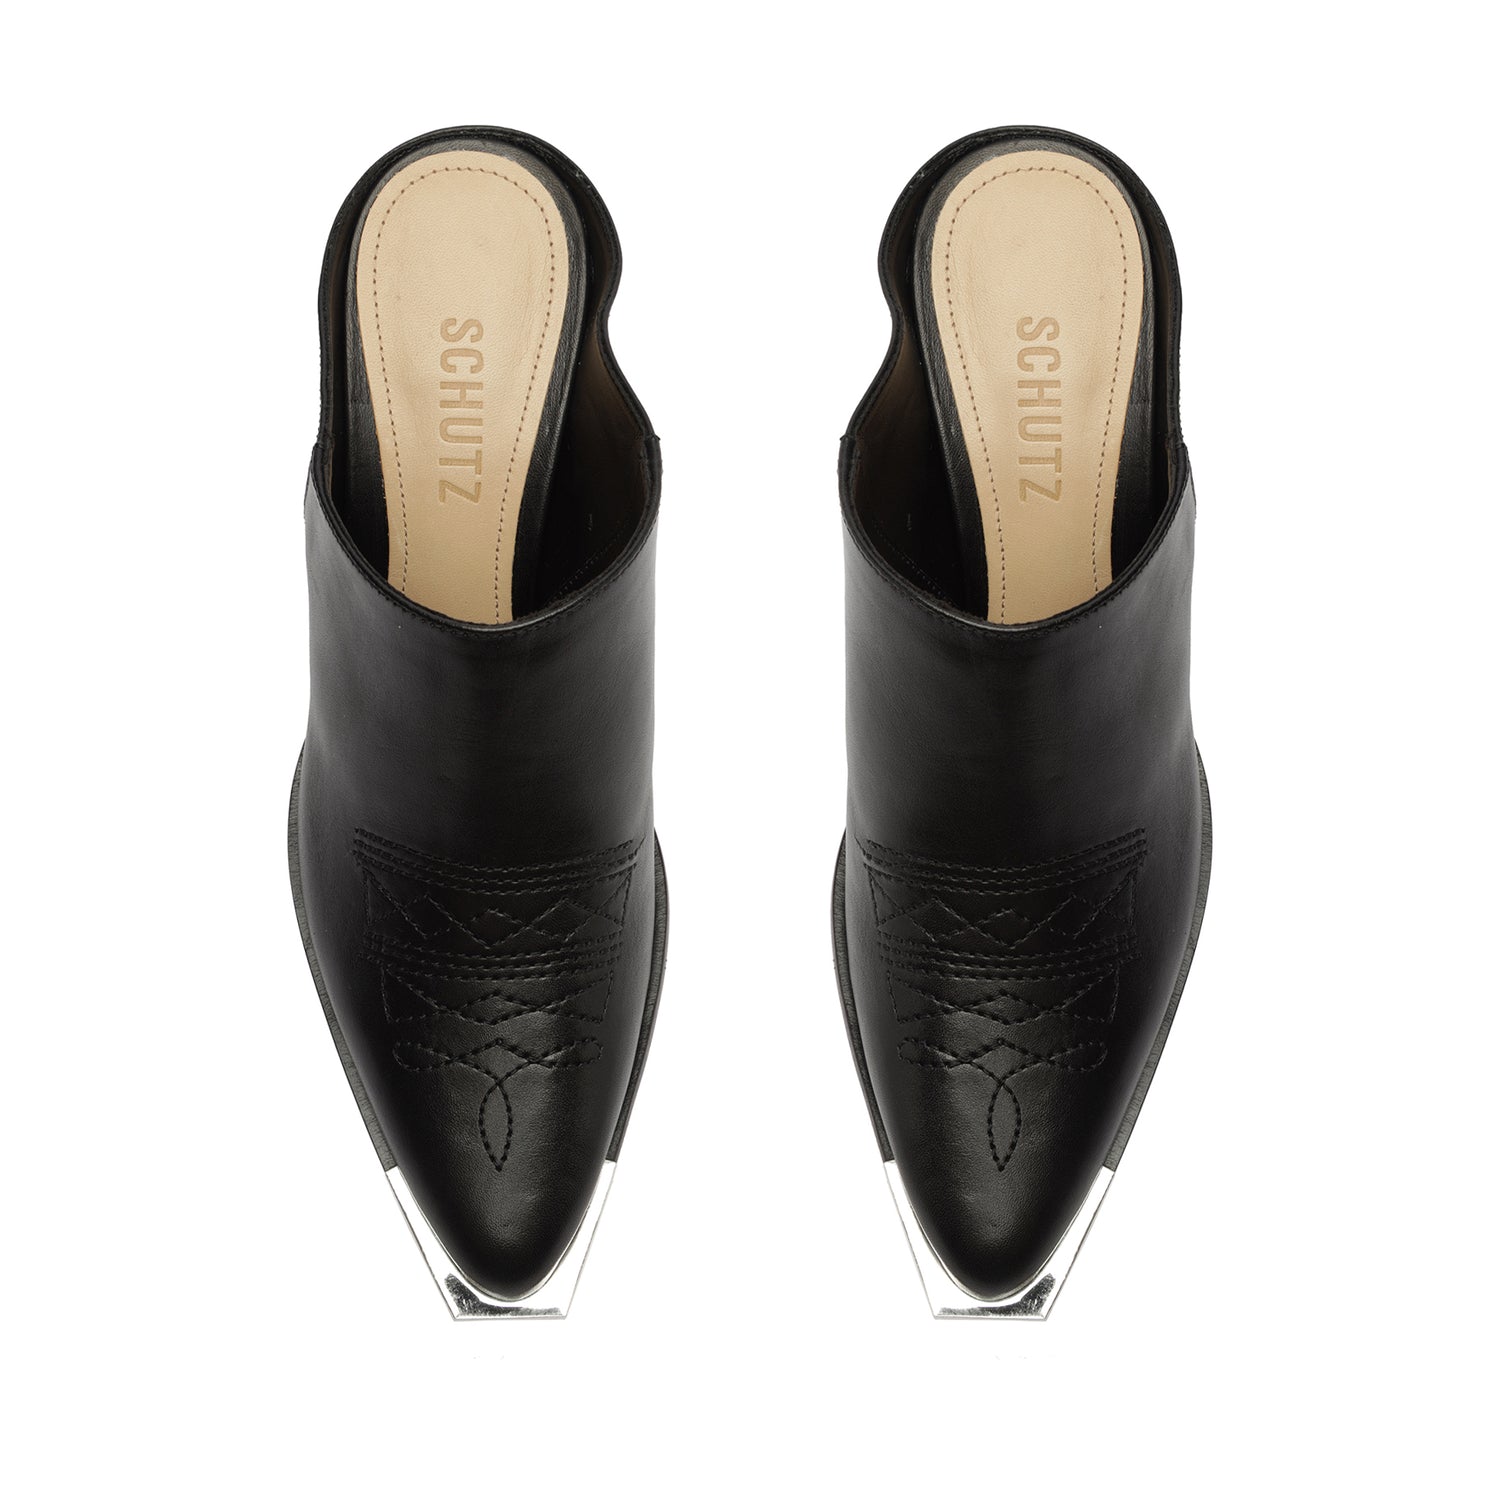 Alley Leather Pump Black Leather